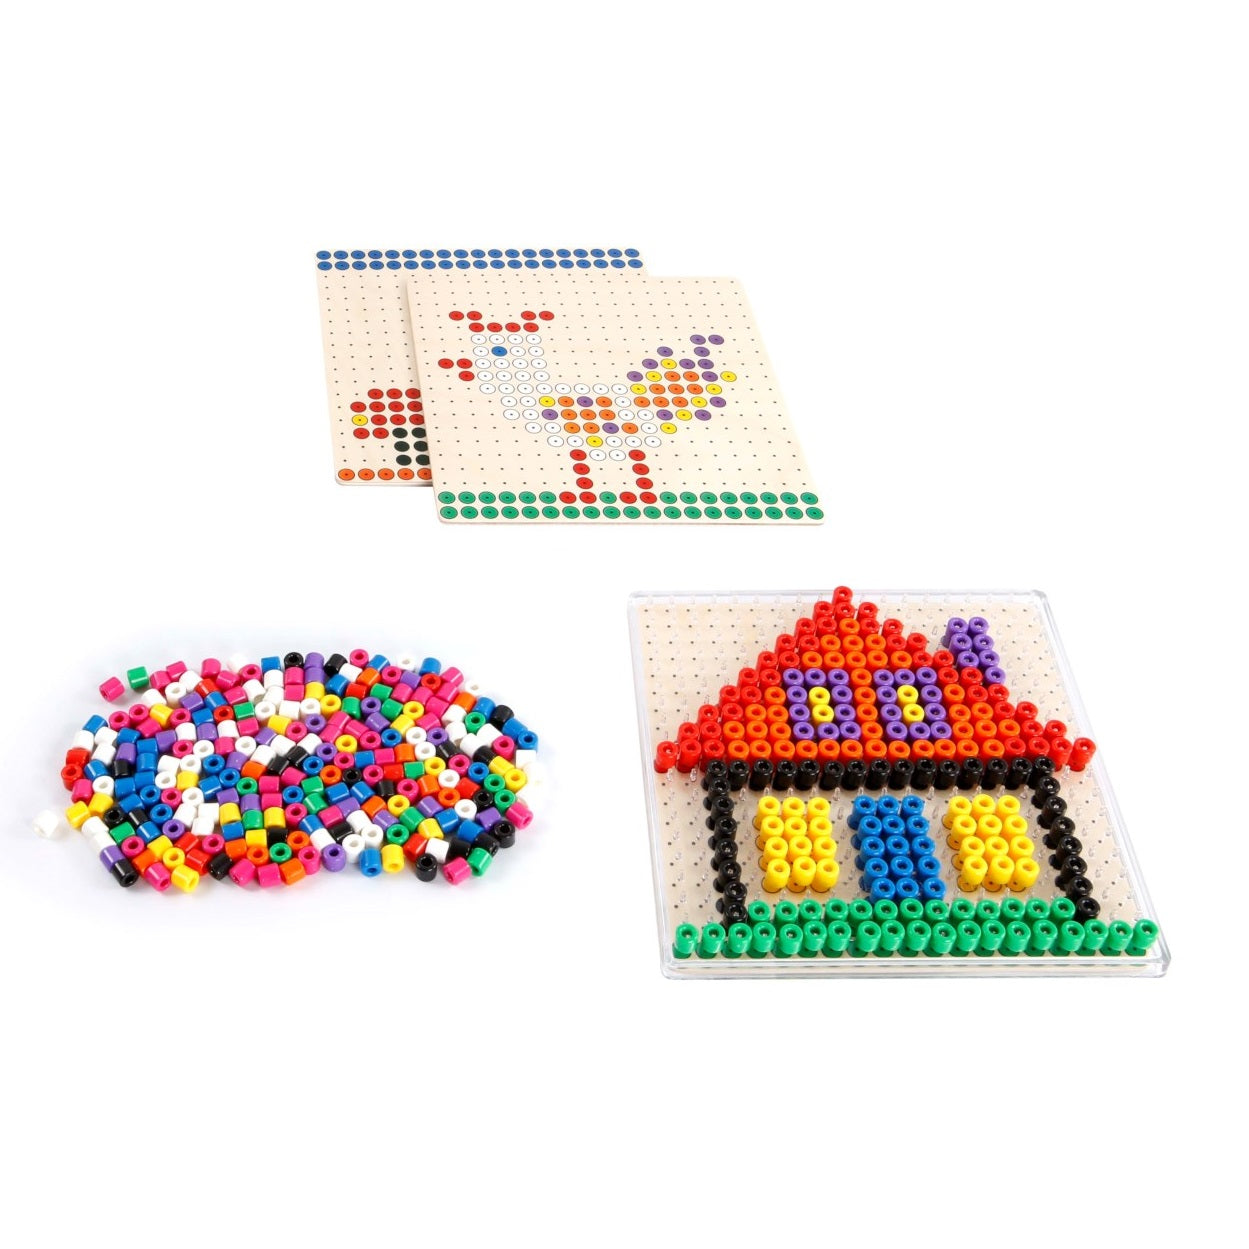 Toys for Life Build with Beads Game 插珠做圖遊戲